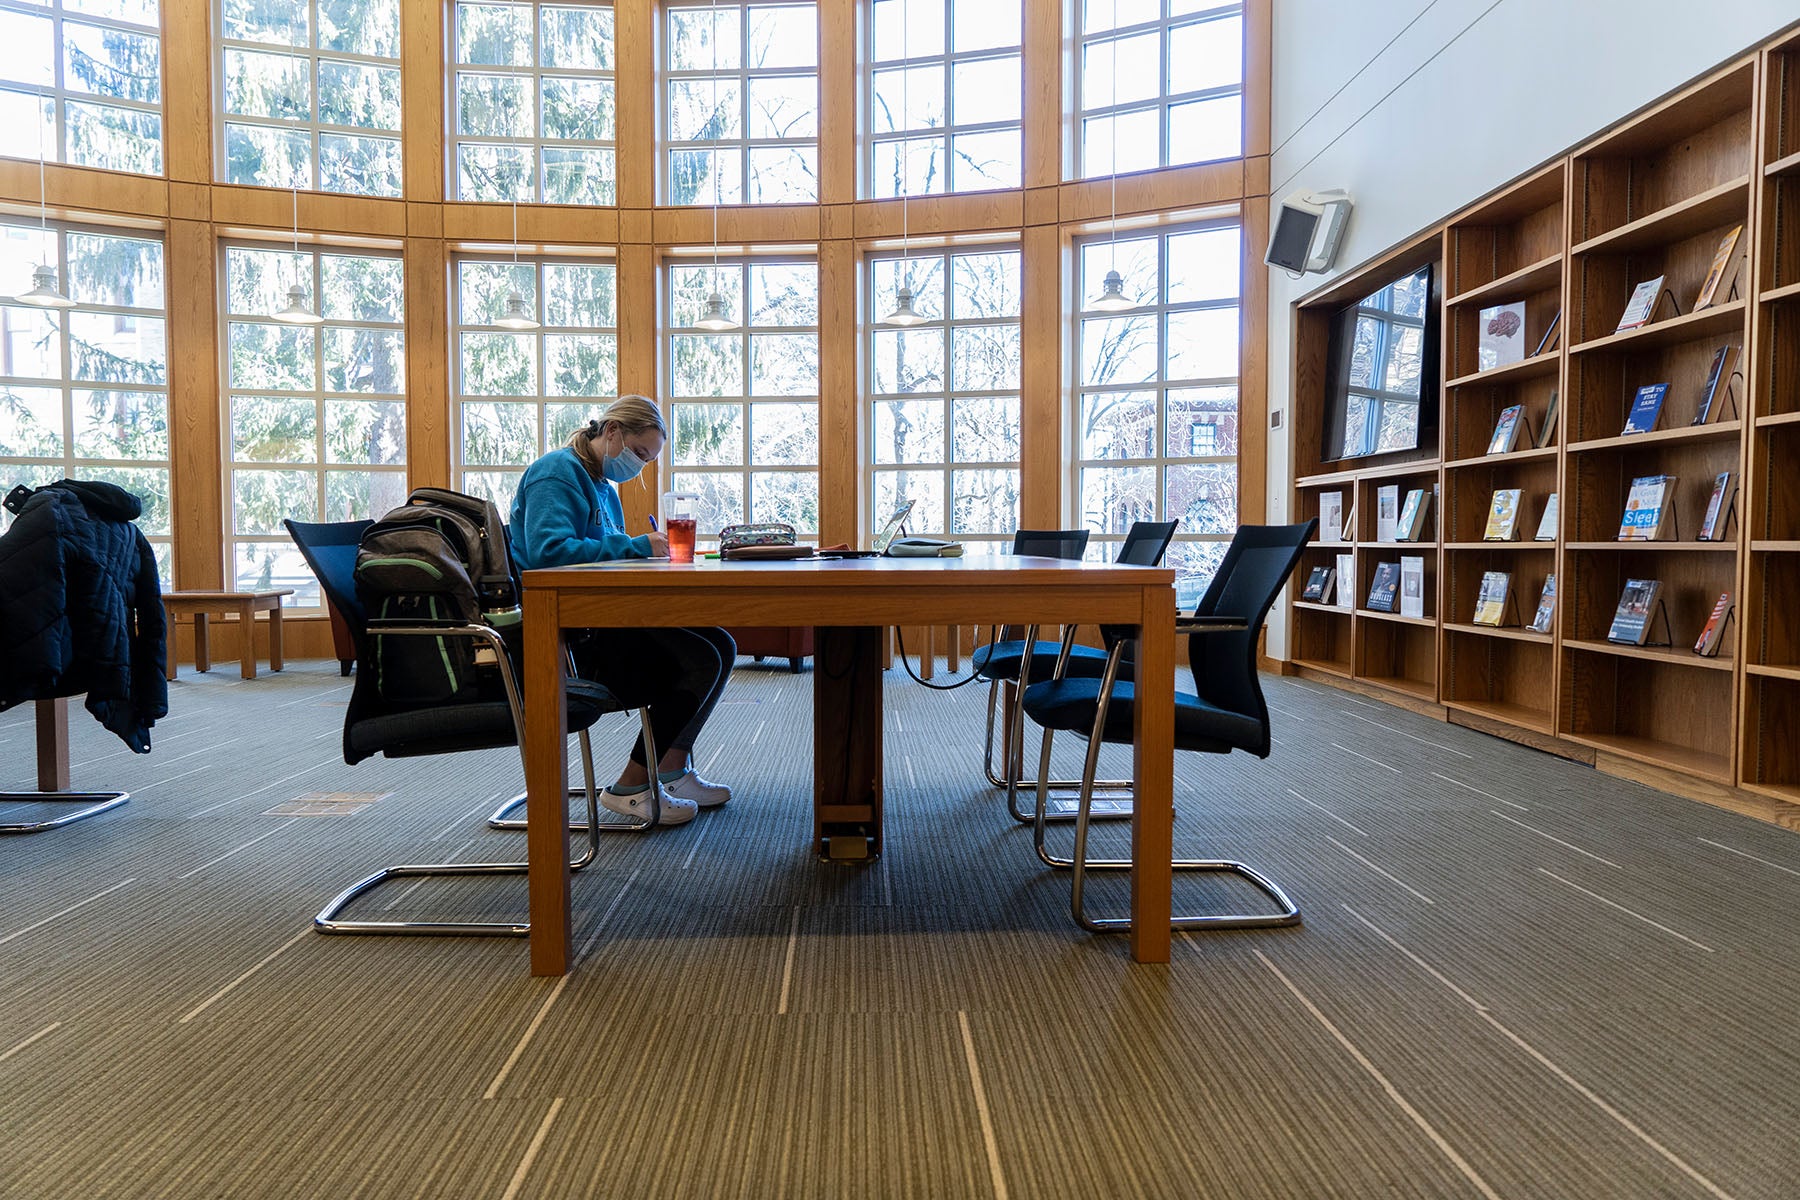 Interior of student studying at large library table